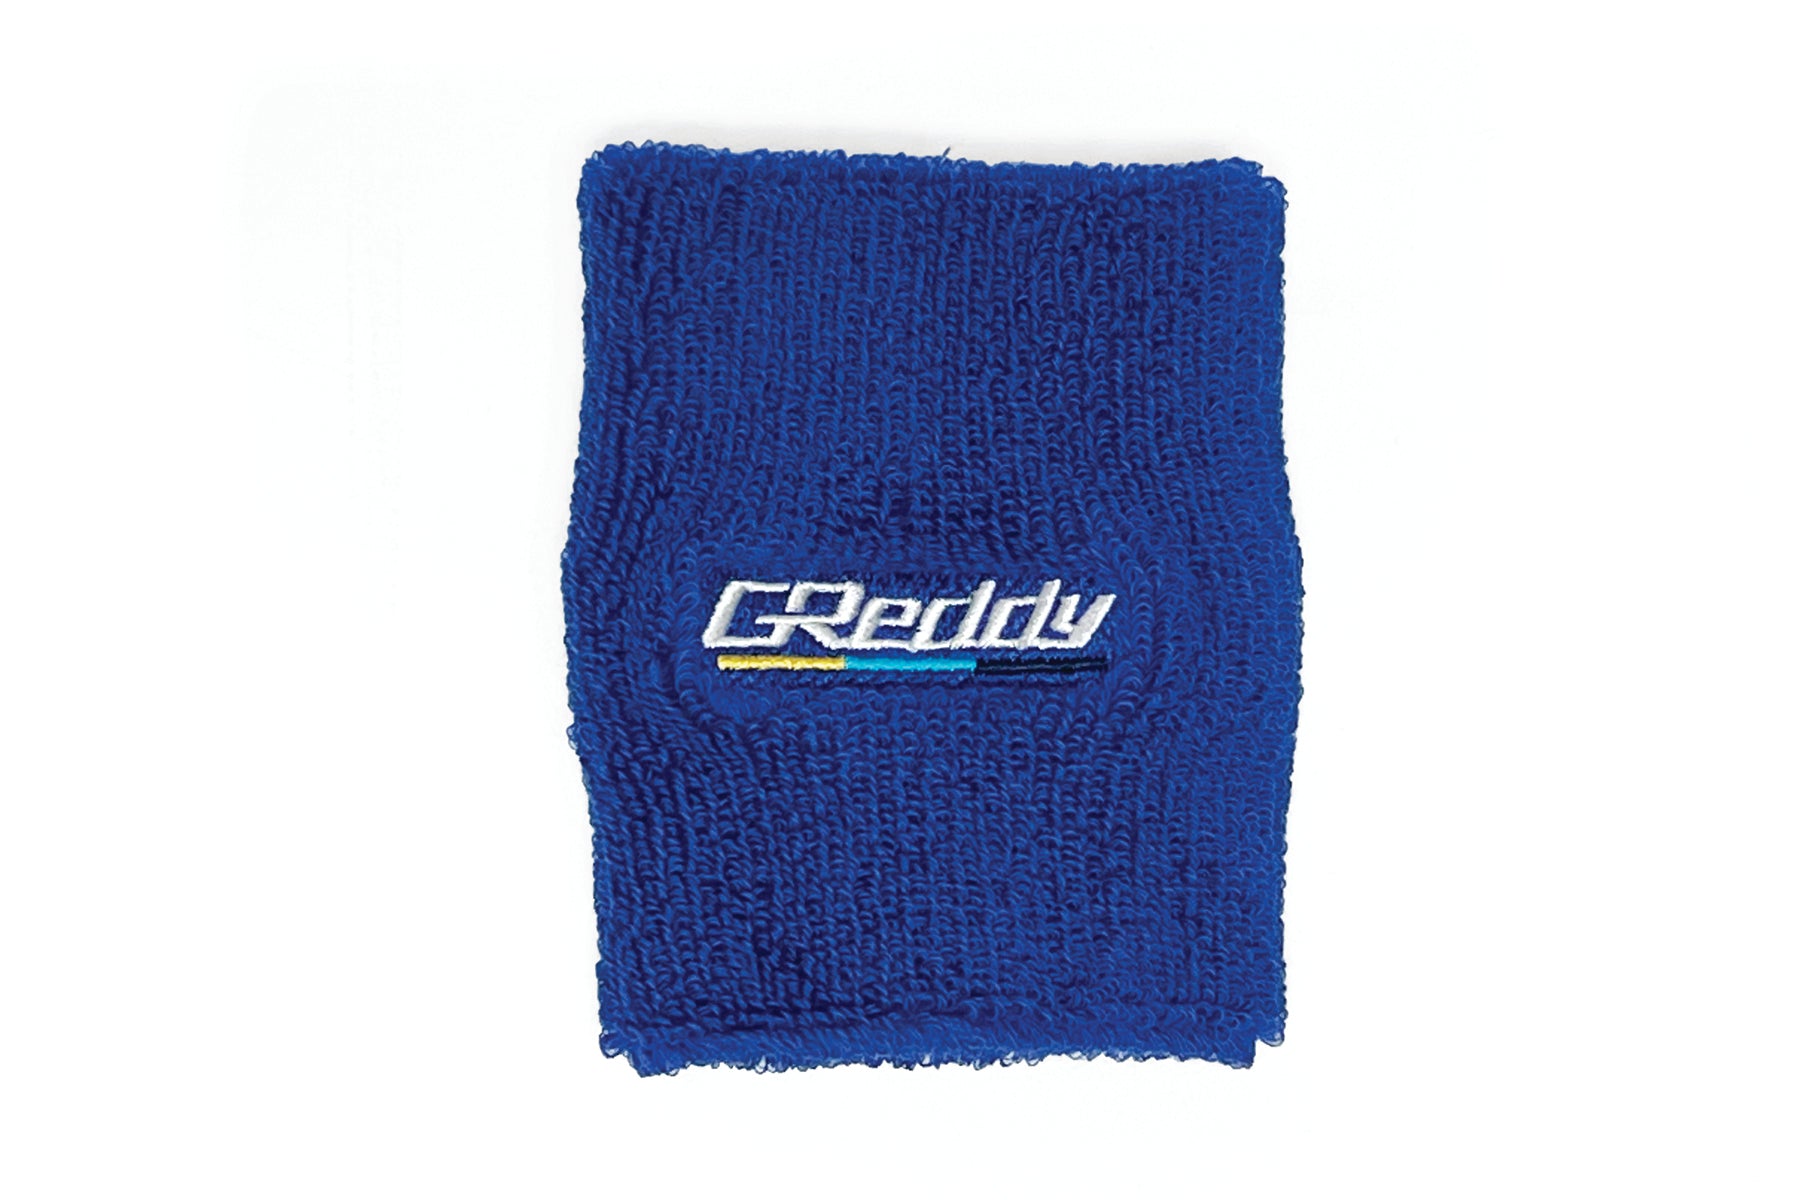 GReddy Reservoir Cover(s) - Blue and Black